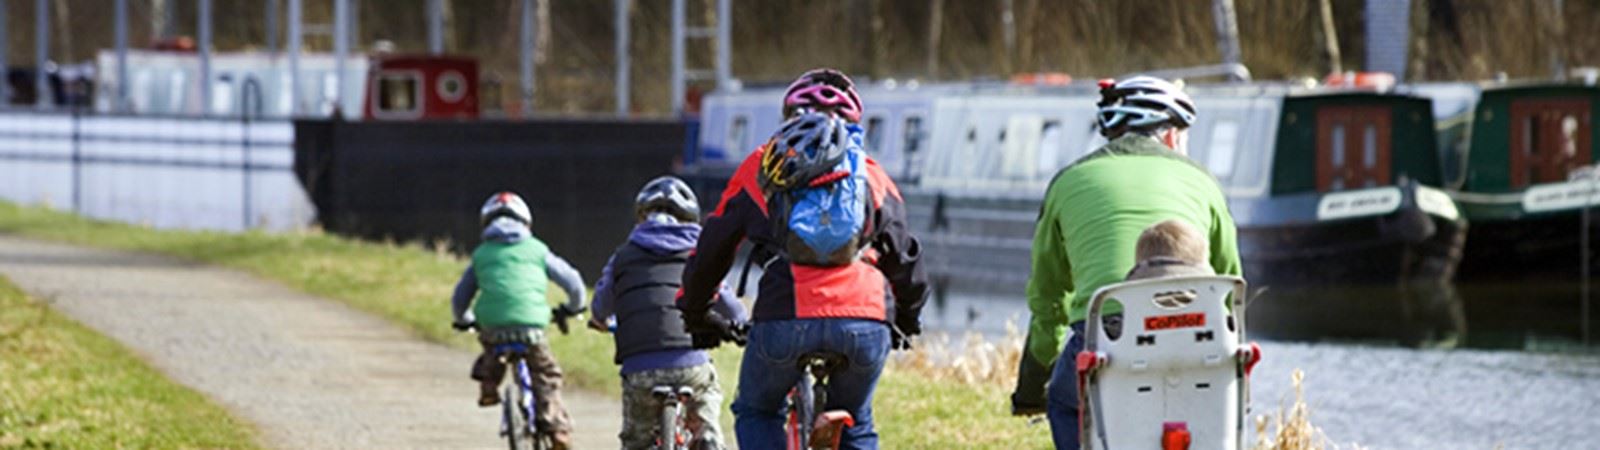 Family Cycling Along Canal Towpath At The Falkirk Wheel C Peter Sandgroundjpg